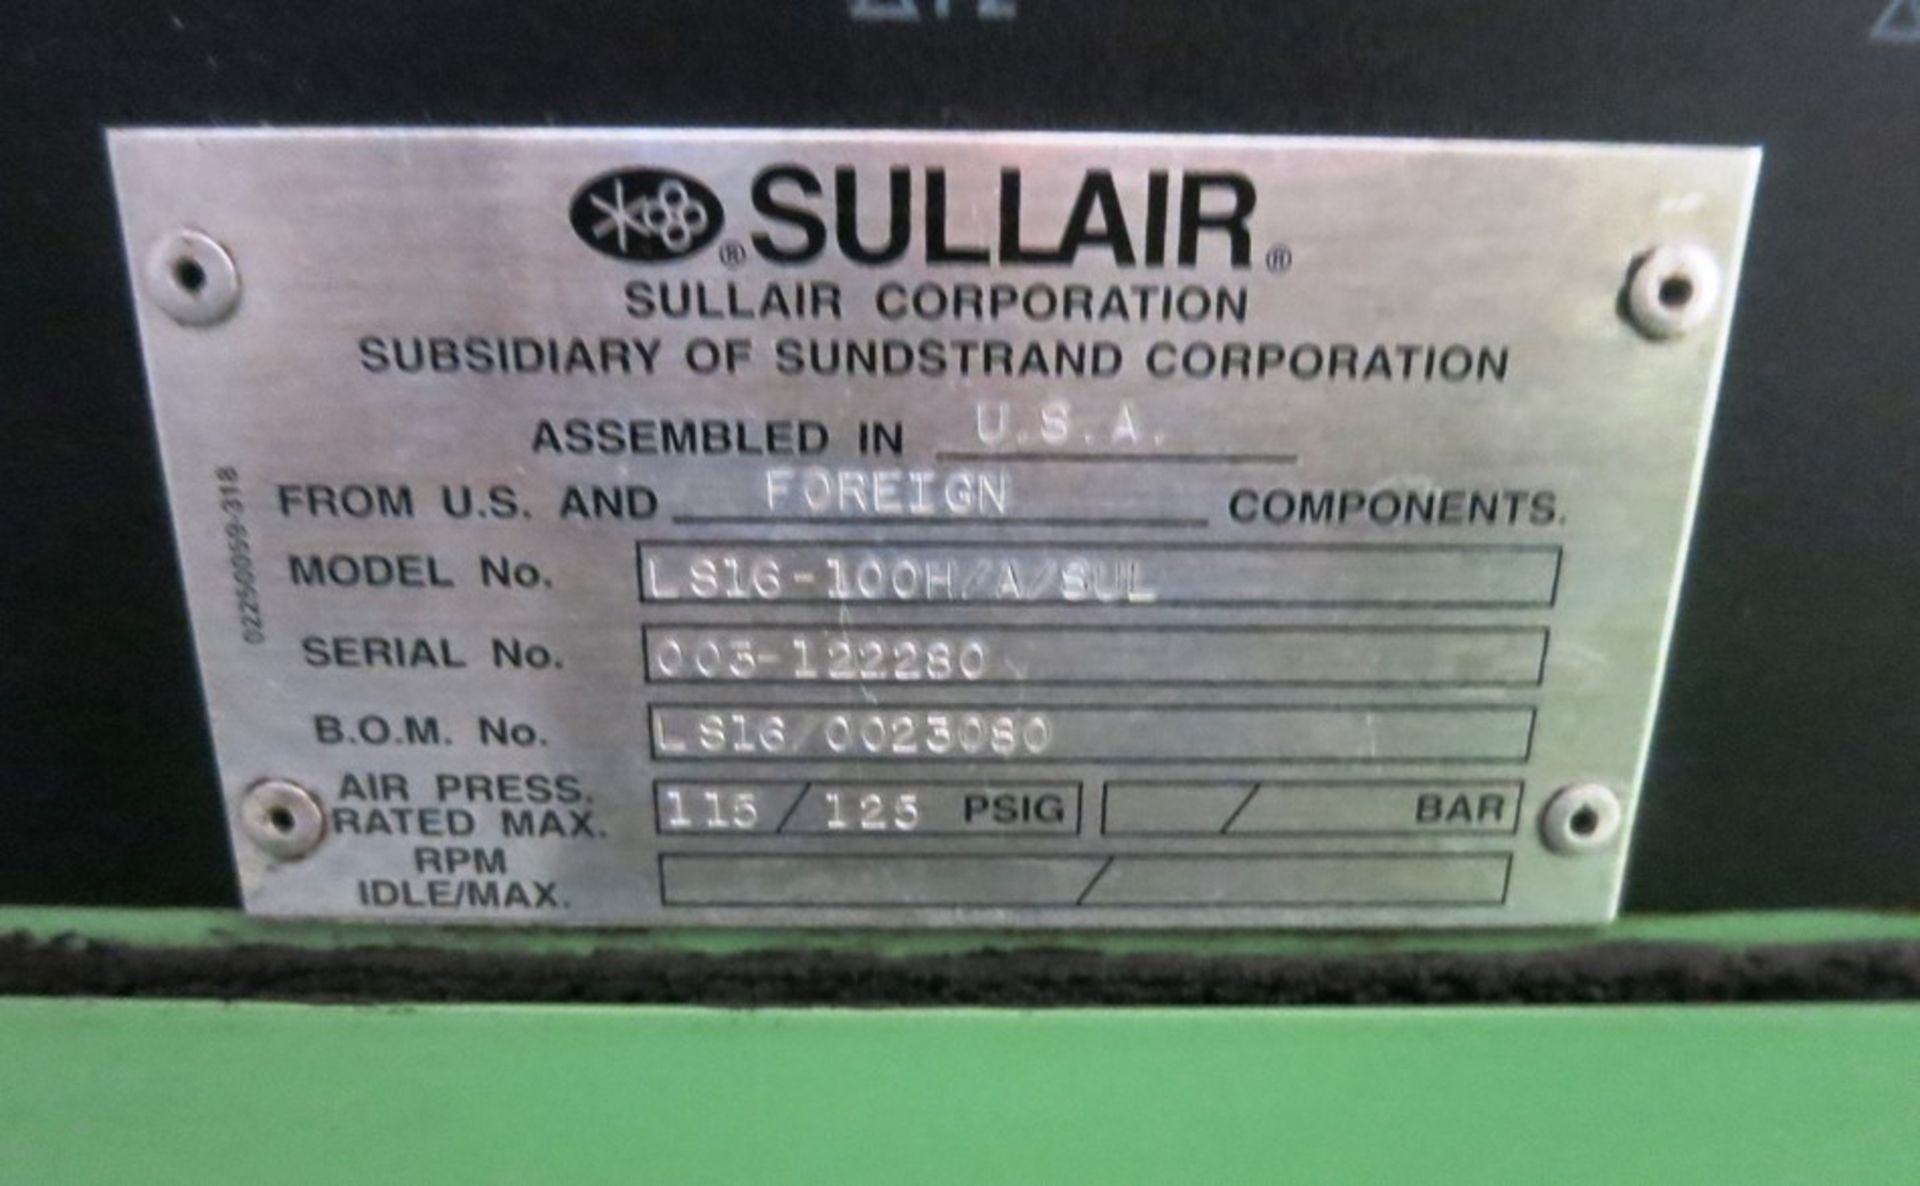 Sullair LS-16-100H/A/Sul Rotary Screw Type Air Compressor, S/N 003122280, General - Image 3 of 3